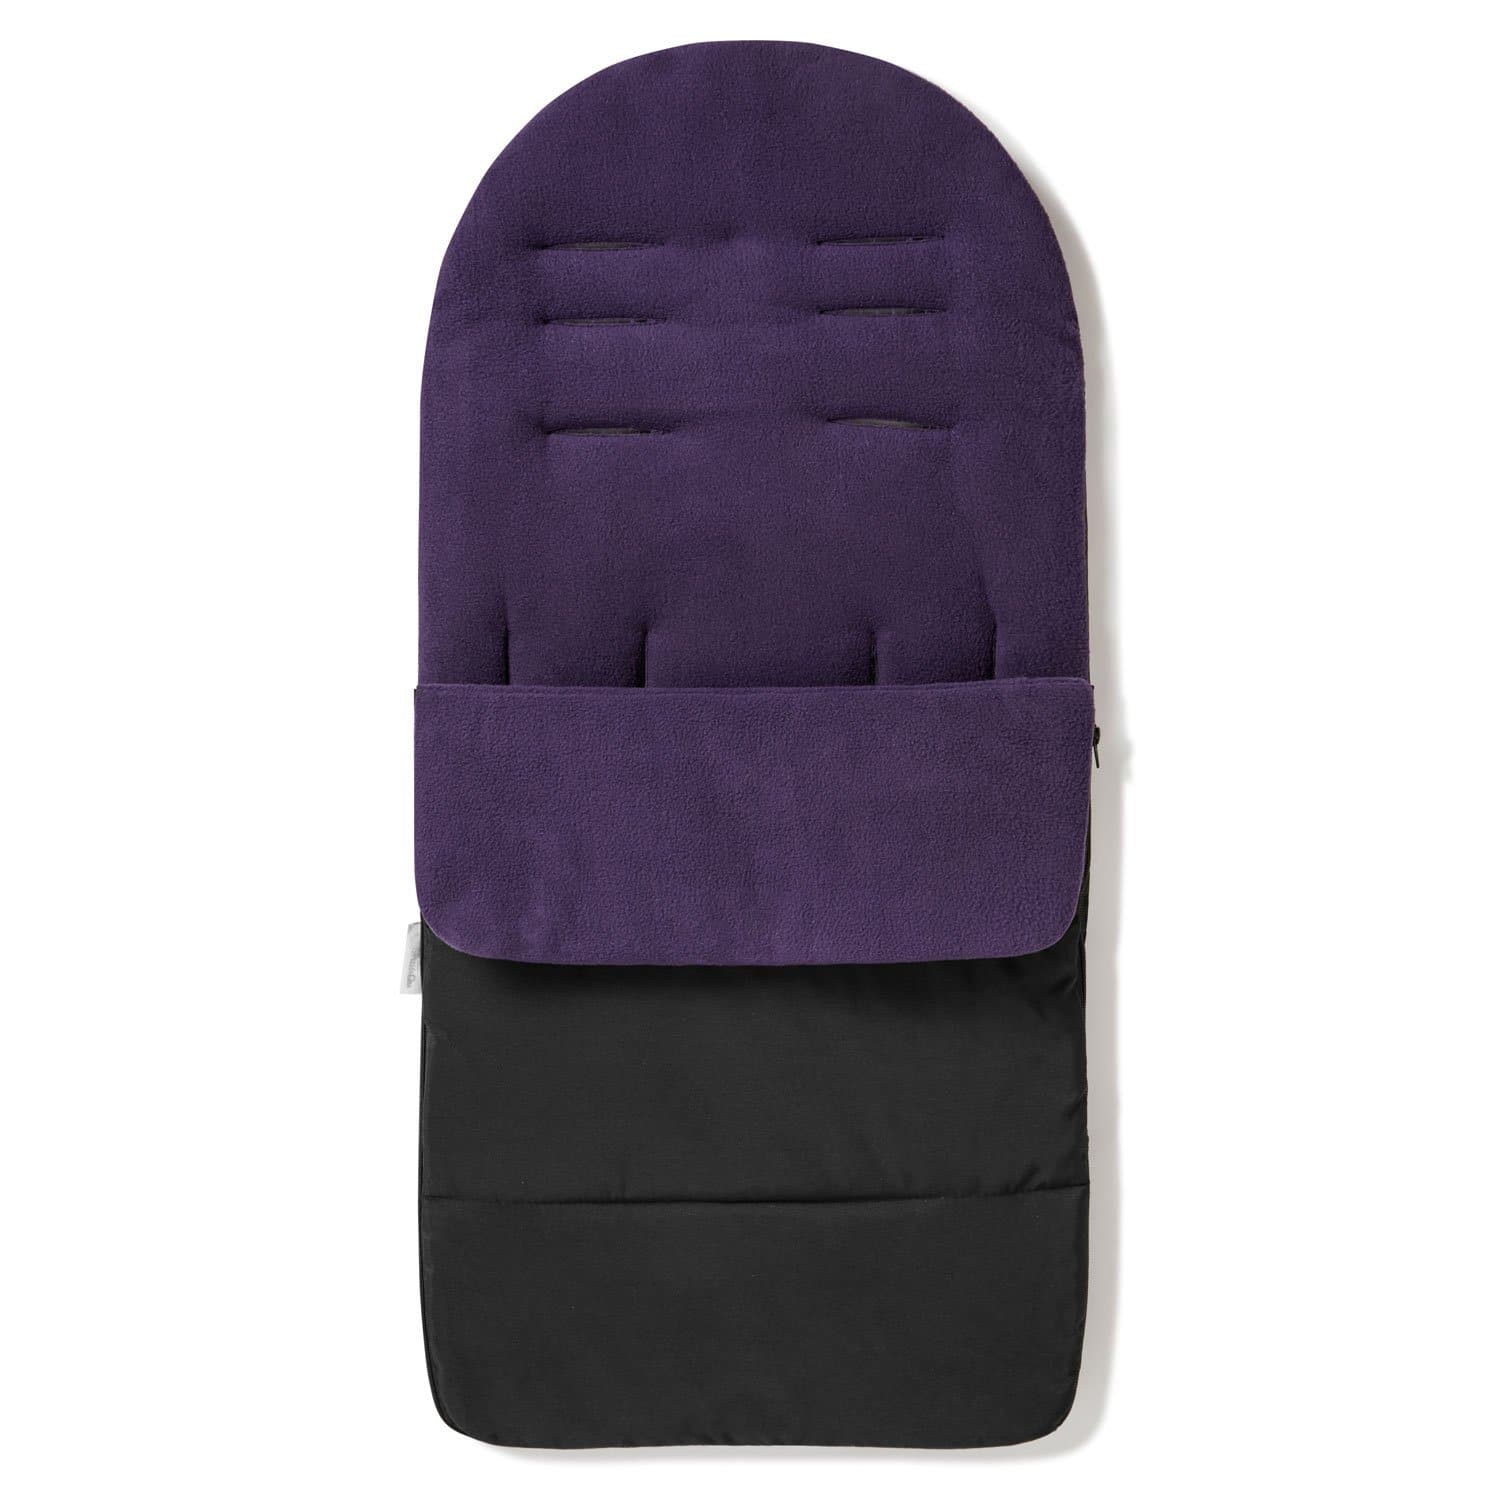 Premium Footmuff / Cosy Toes Compatible with Zeta - Plum Purple / Fits All Models | For Your Little One